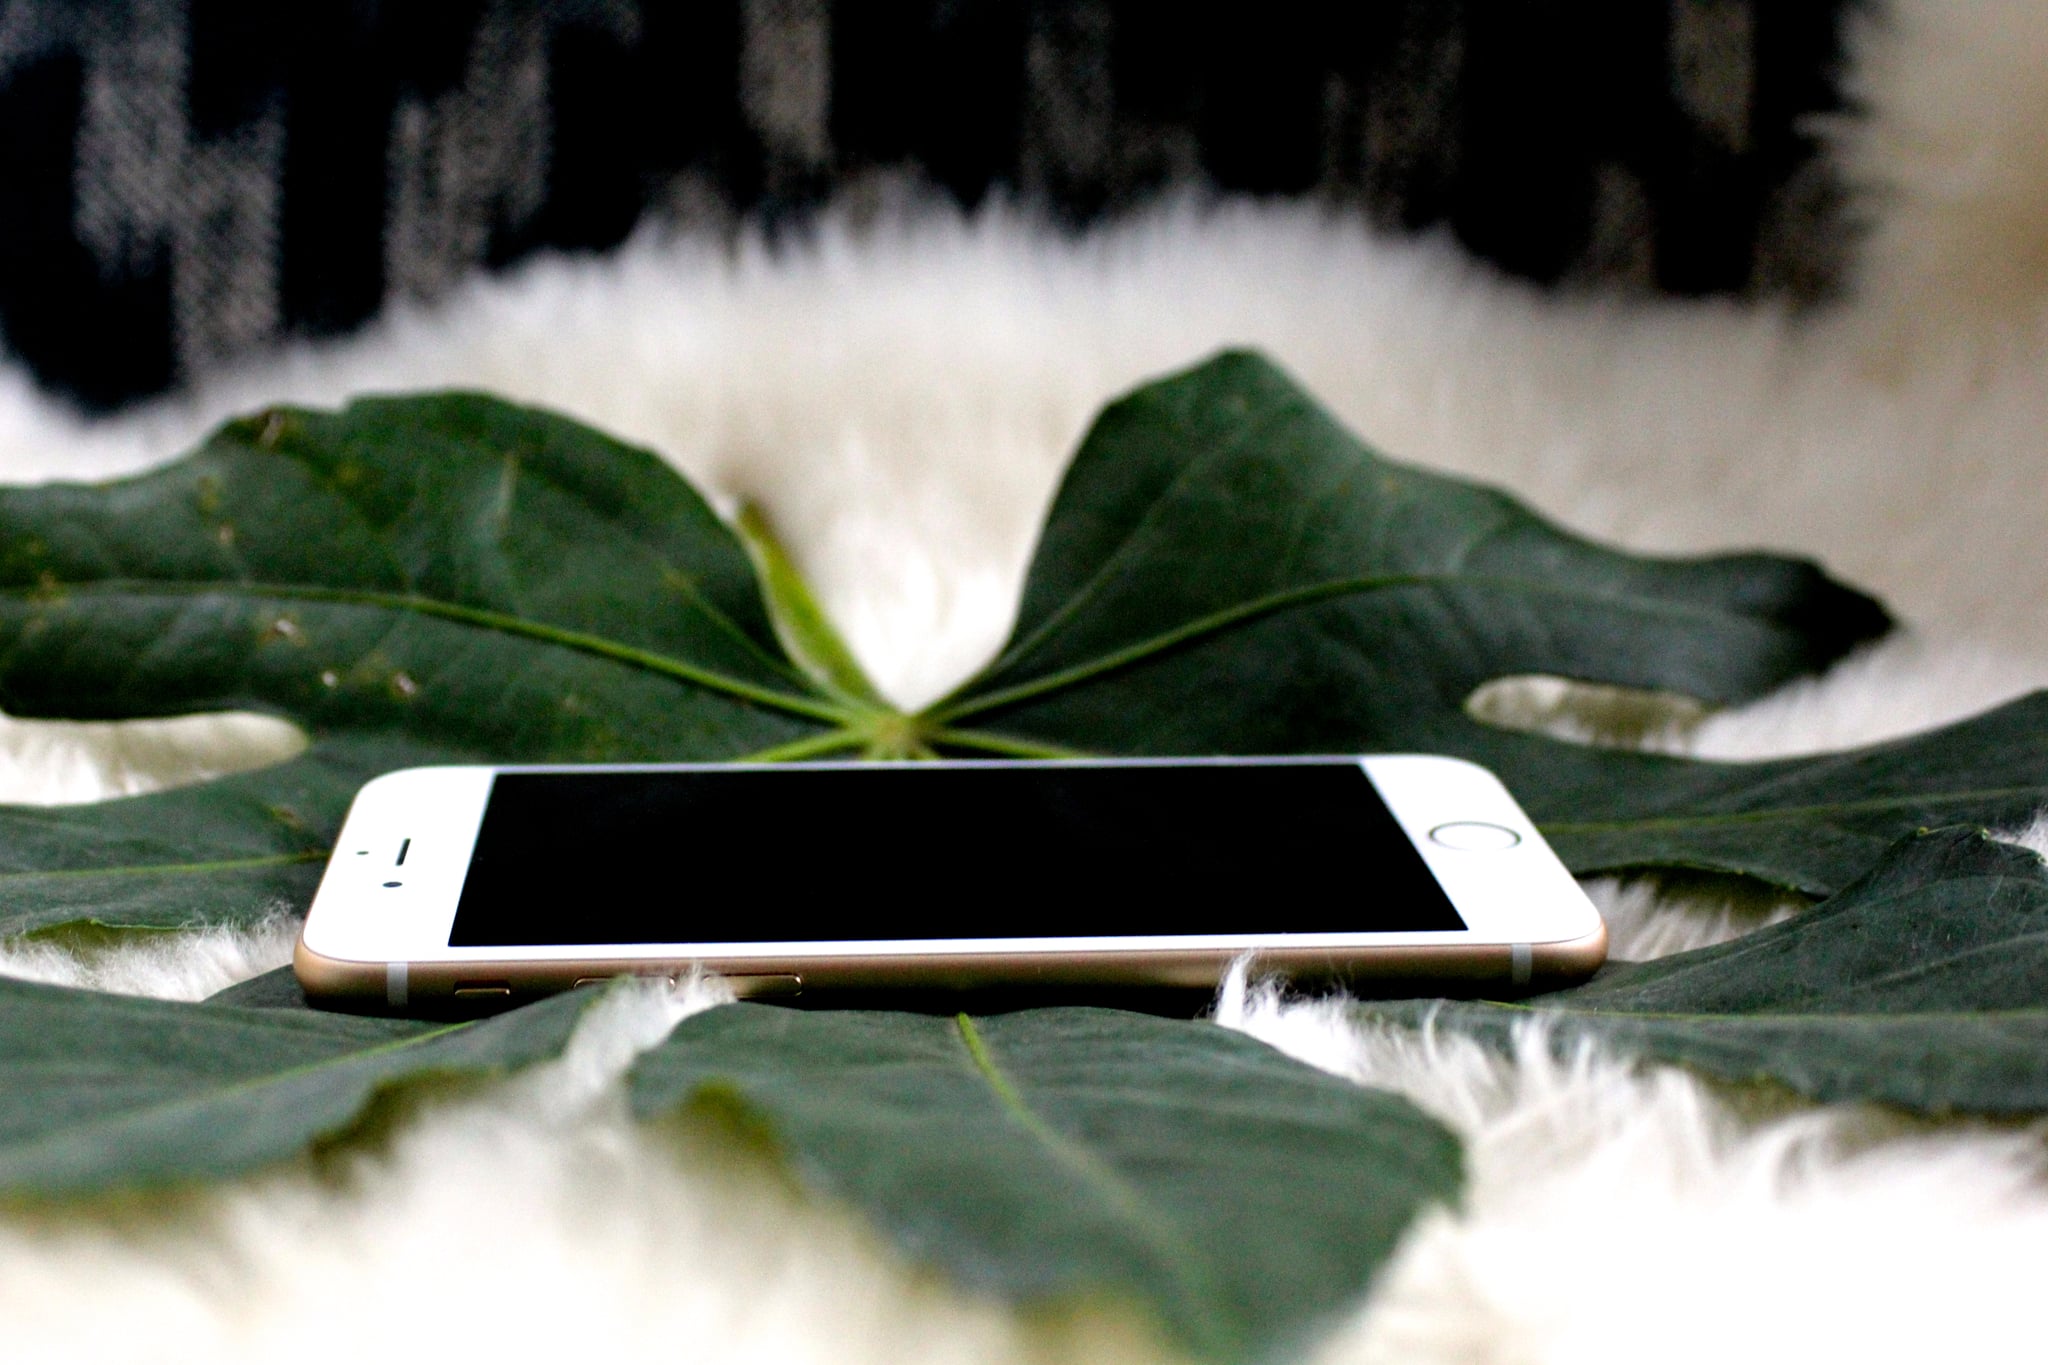 How To Find Your Iphone On Silent Popsugar Tech